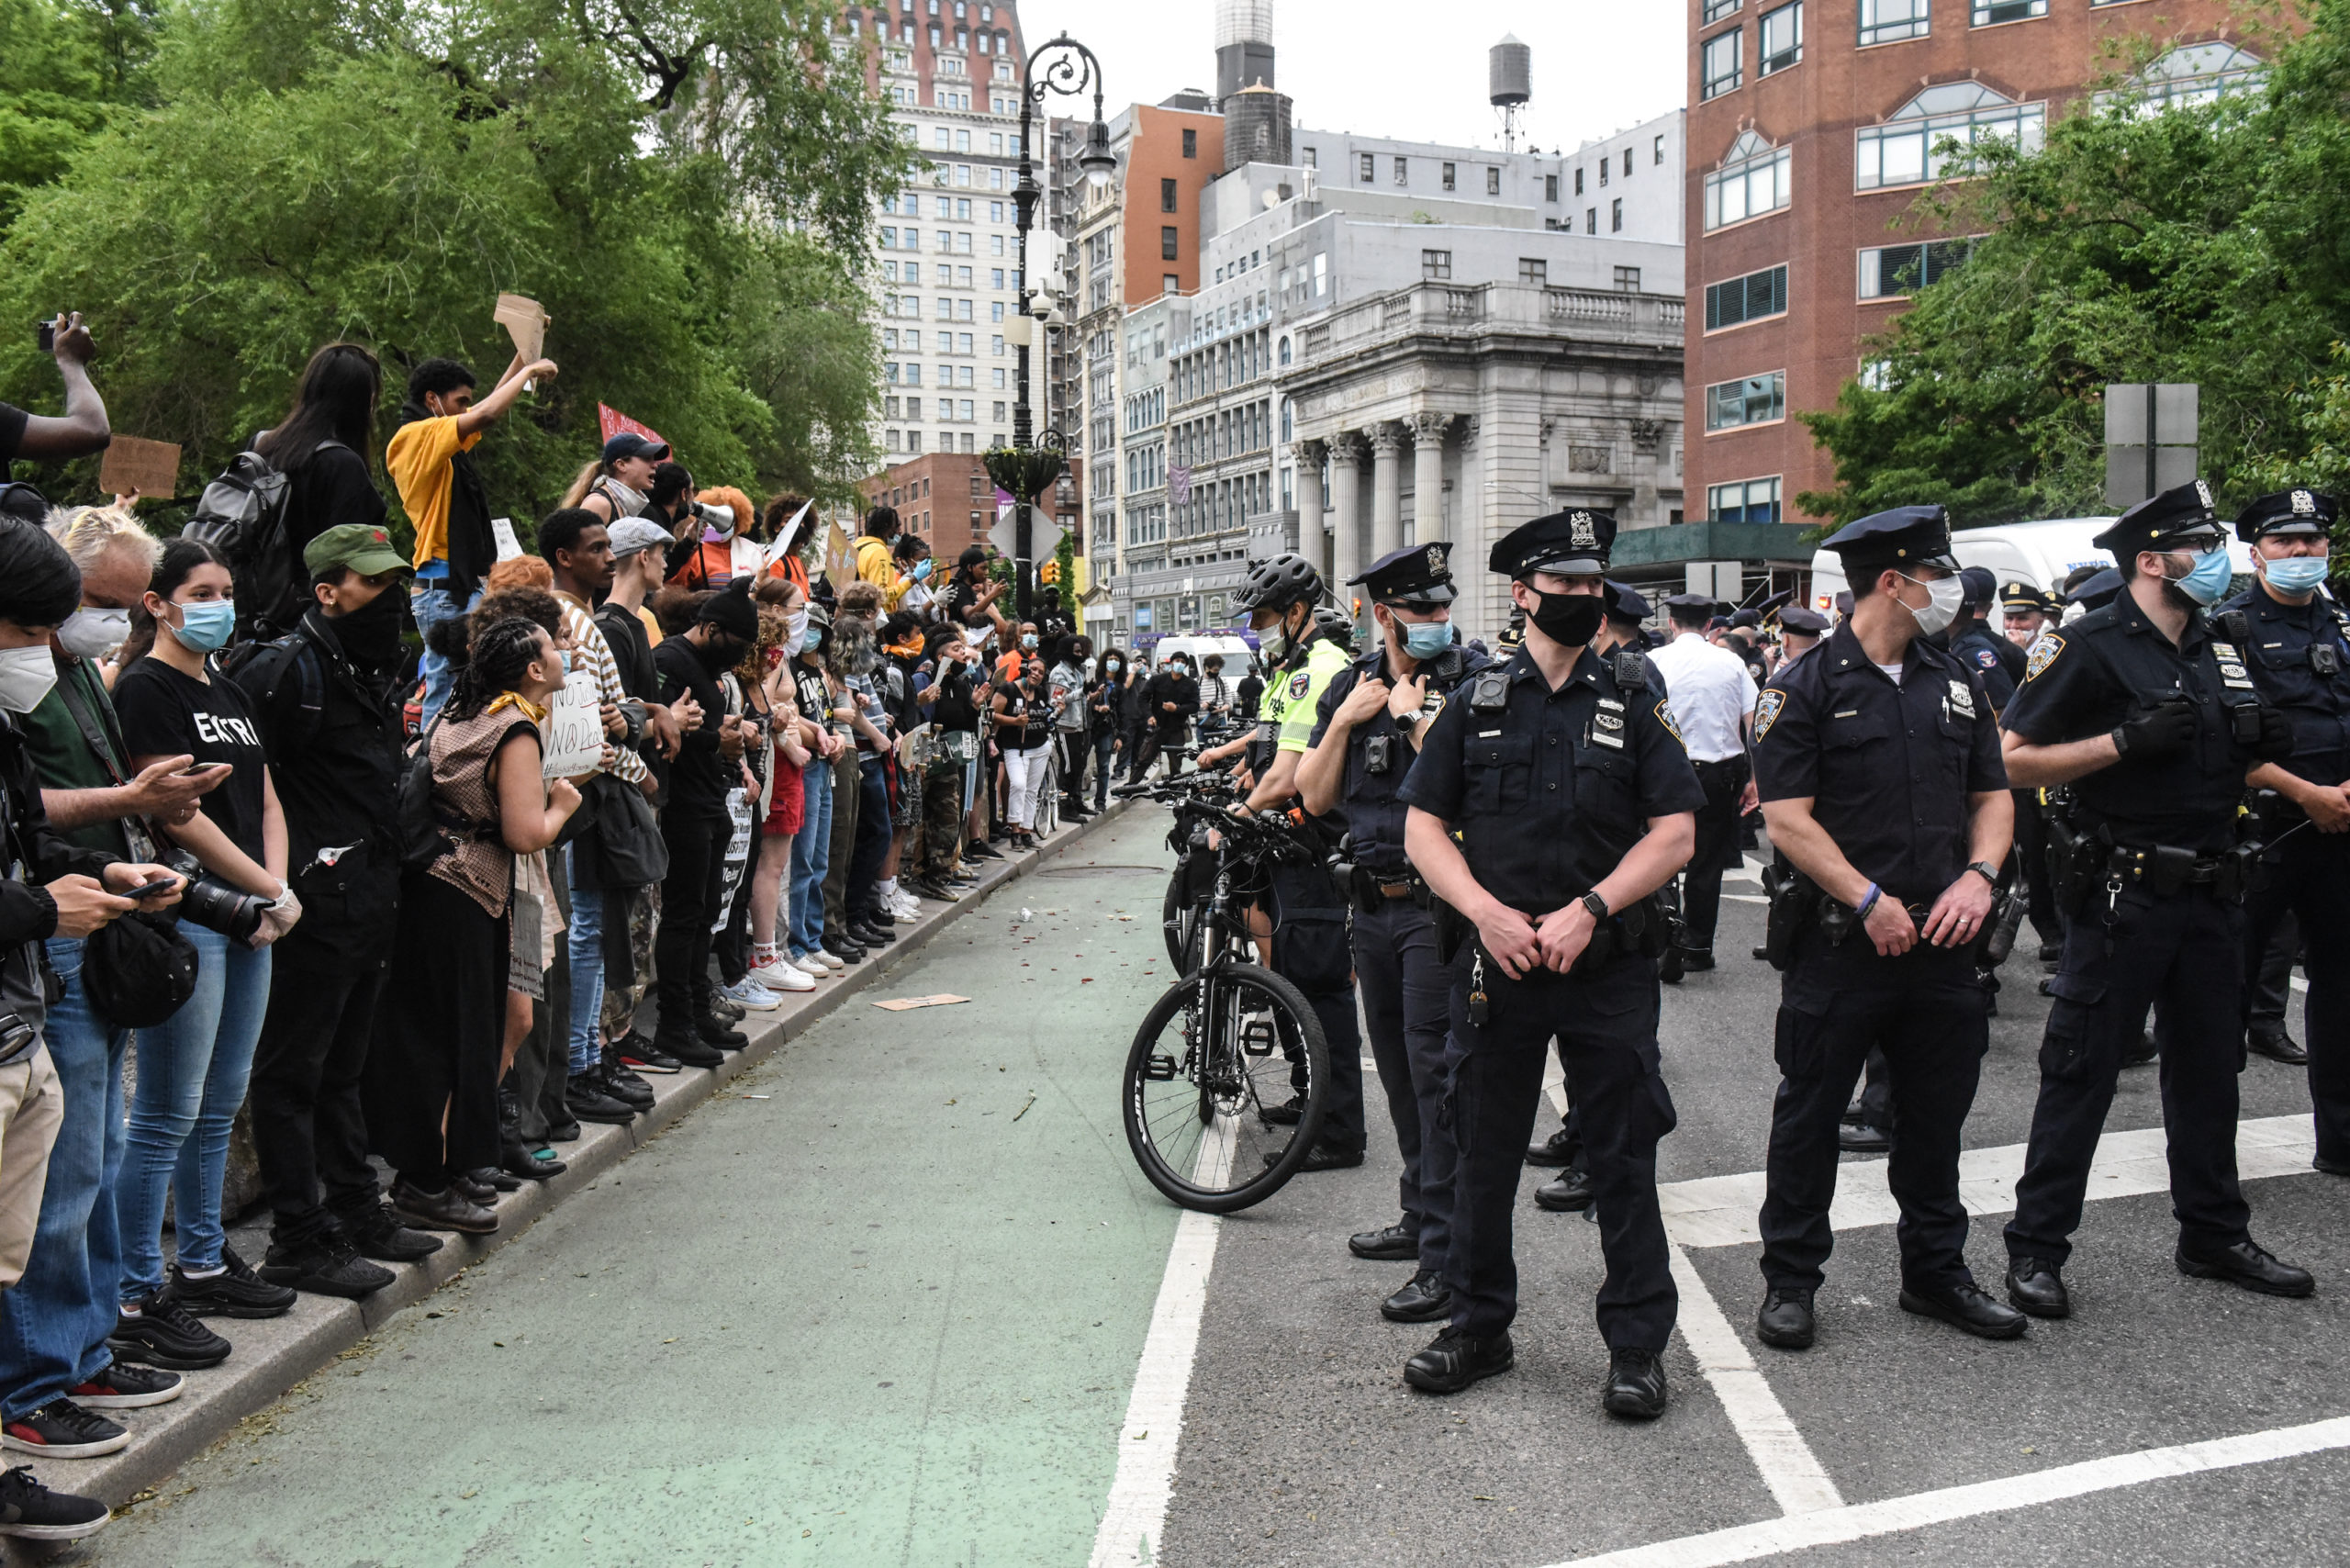 NEW YORK, NY - MAY 28: Protesters clash with police during a rally against the death of Minneapolis, Minnesota man George Floyd at the hands of police on May 28, 2020 in Union Square in New York City. Floyd's death was captured in video that went viral of the incident. Minnesota Gov. Tim Walz called in the National Guard today as looting broke out in St. Paul. (Photo by Stephanie Keith/Getty Images)